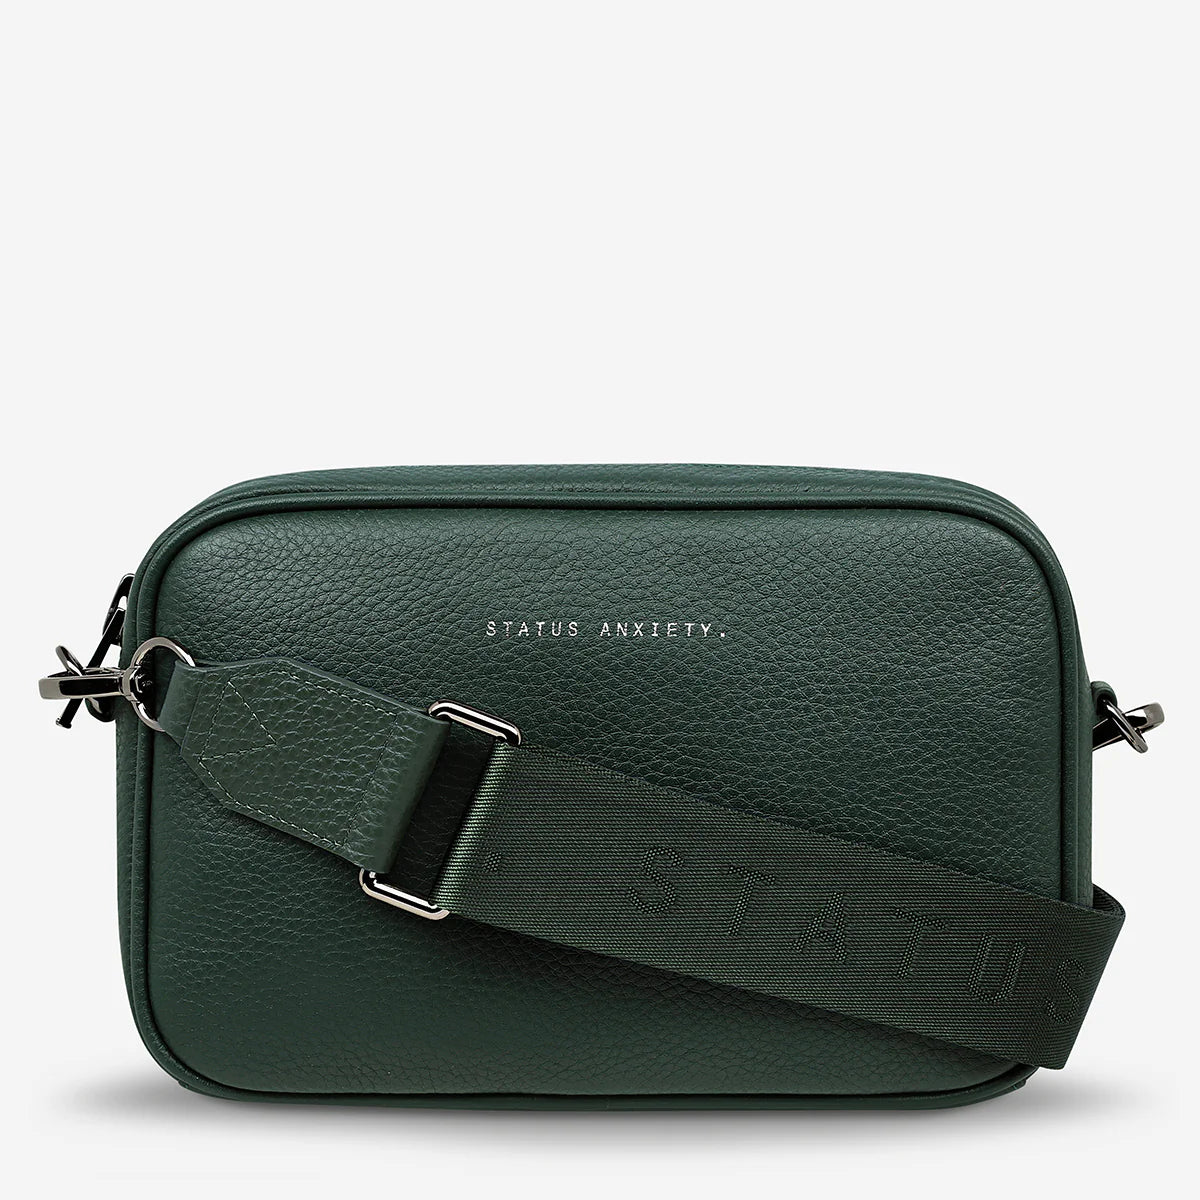 Plunder with webbed strap - Green